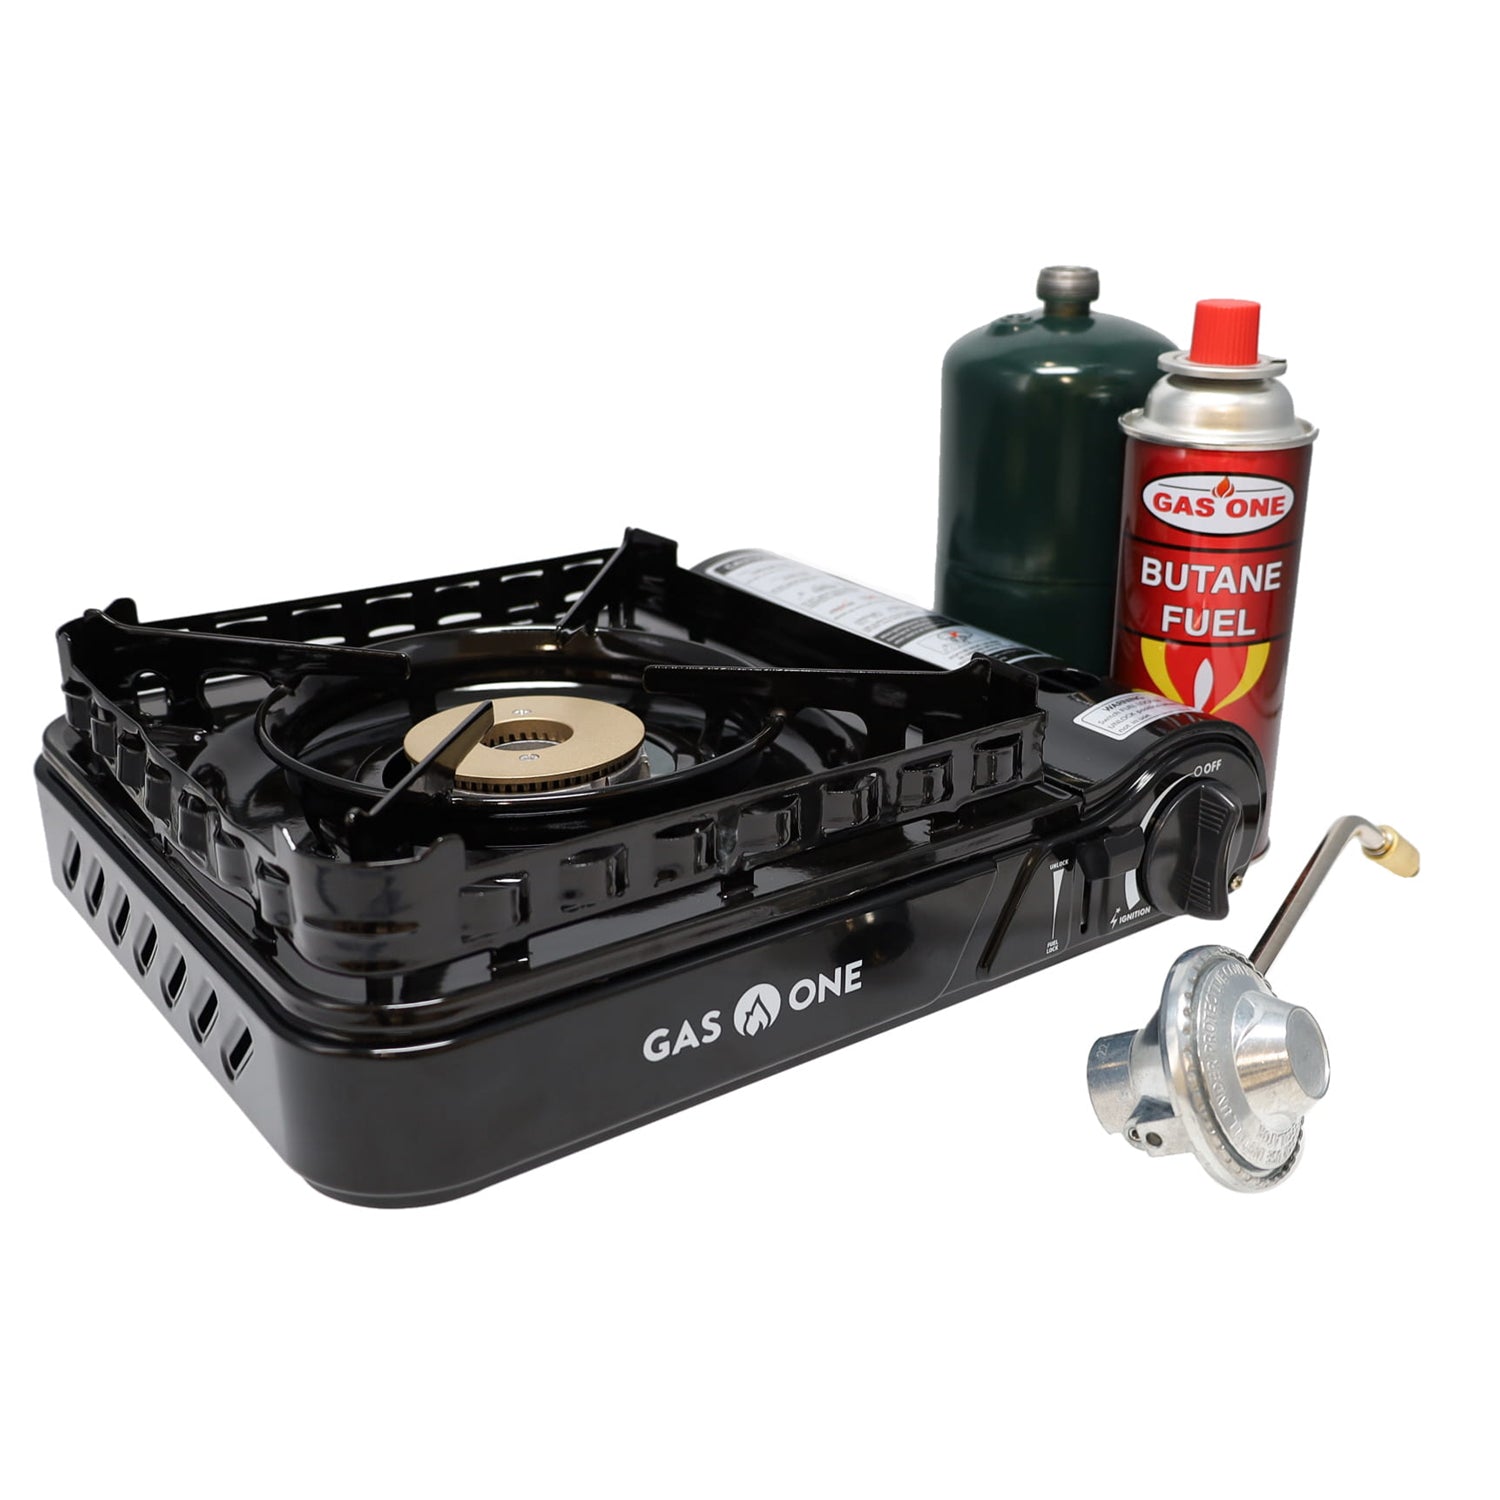 GAS One Gs-3900p Dual Fuel Propane or Butane Portable Stove with